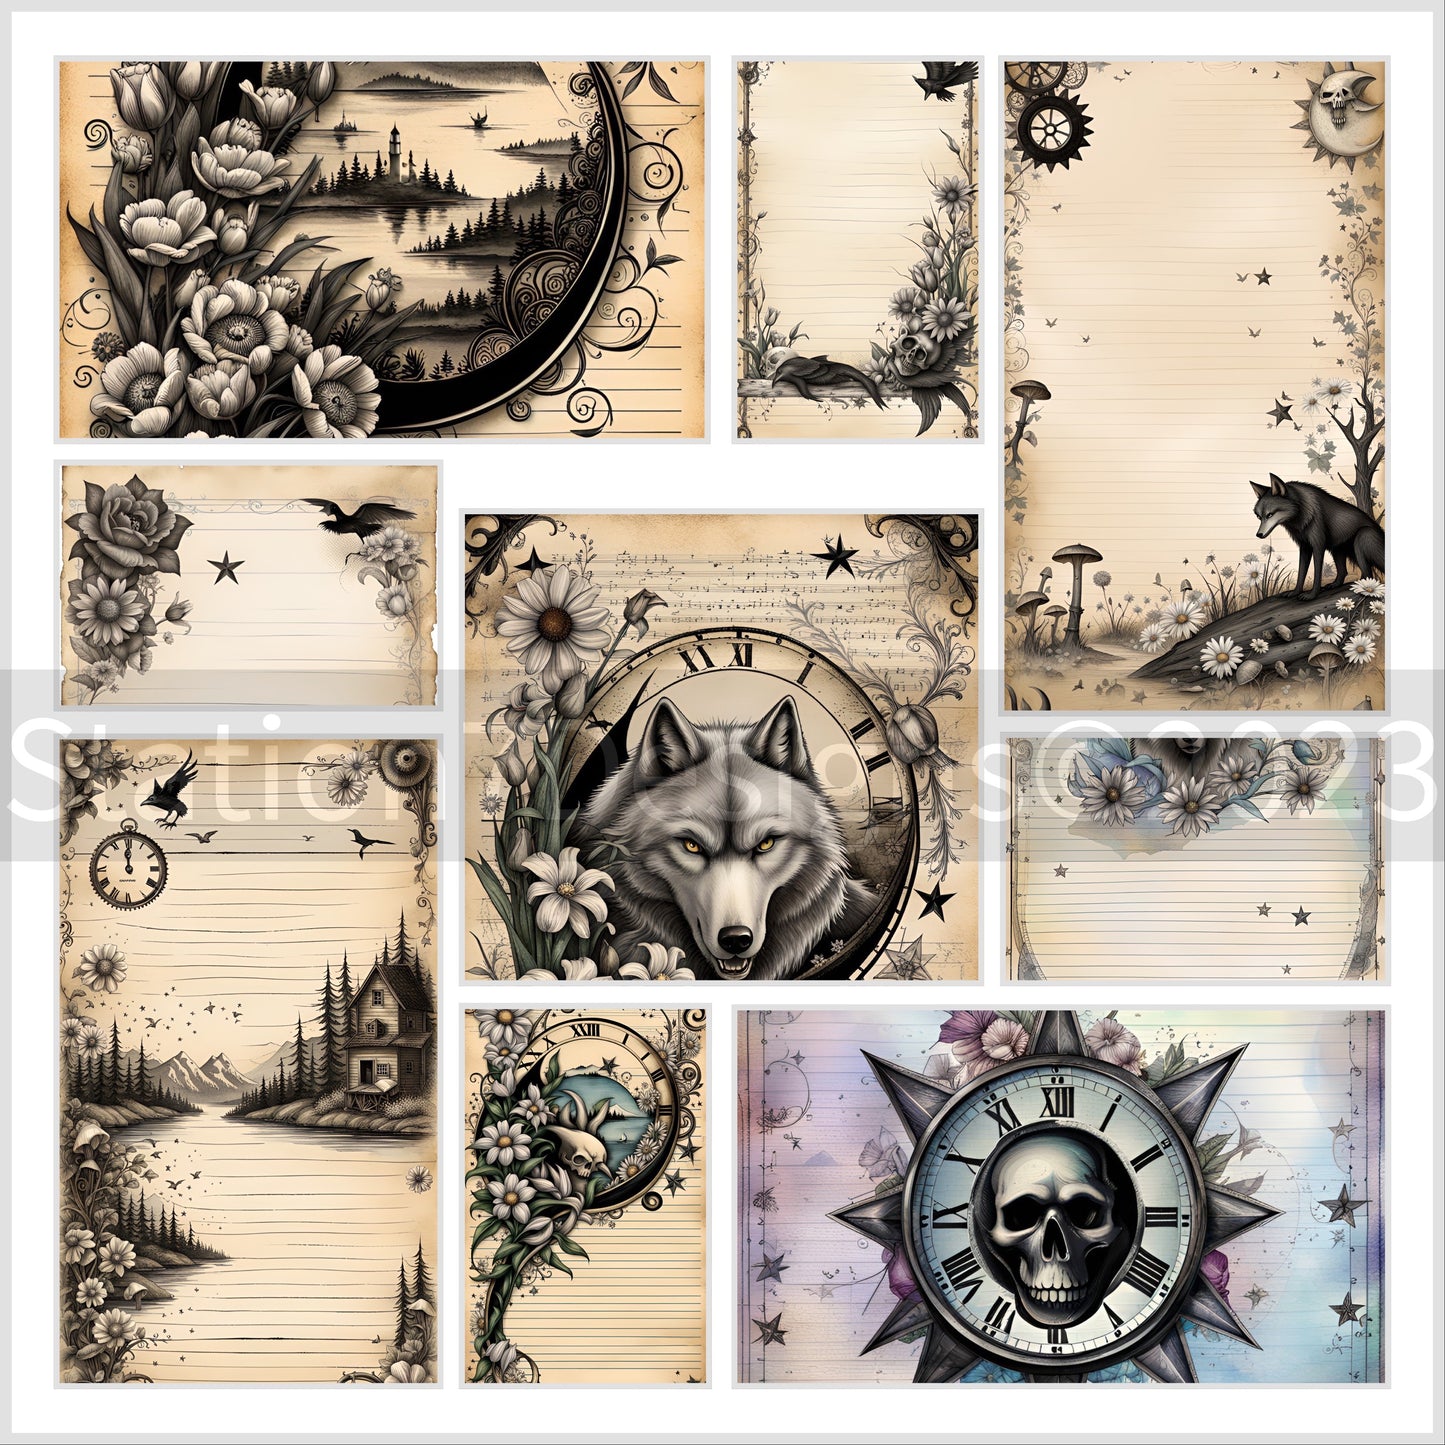 The Gothic Wilds Antiqued Junk Journal Stationery Scrapbooking Set Of 25 Prints-Recycled Linen Paper Or Card Stock